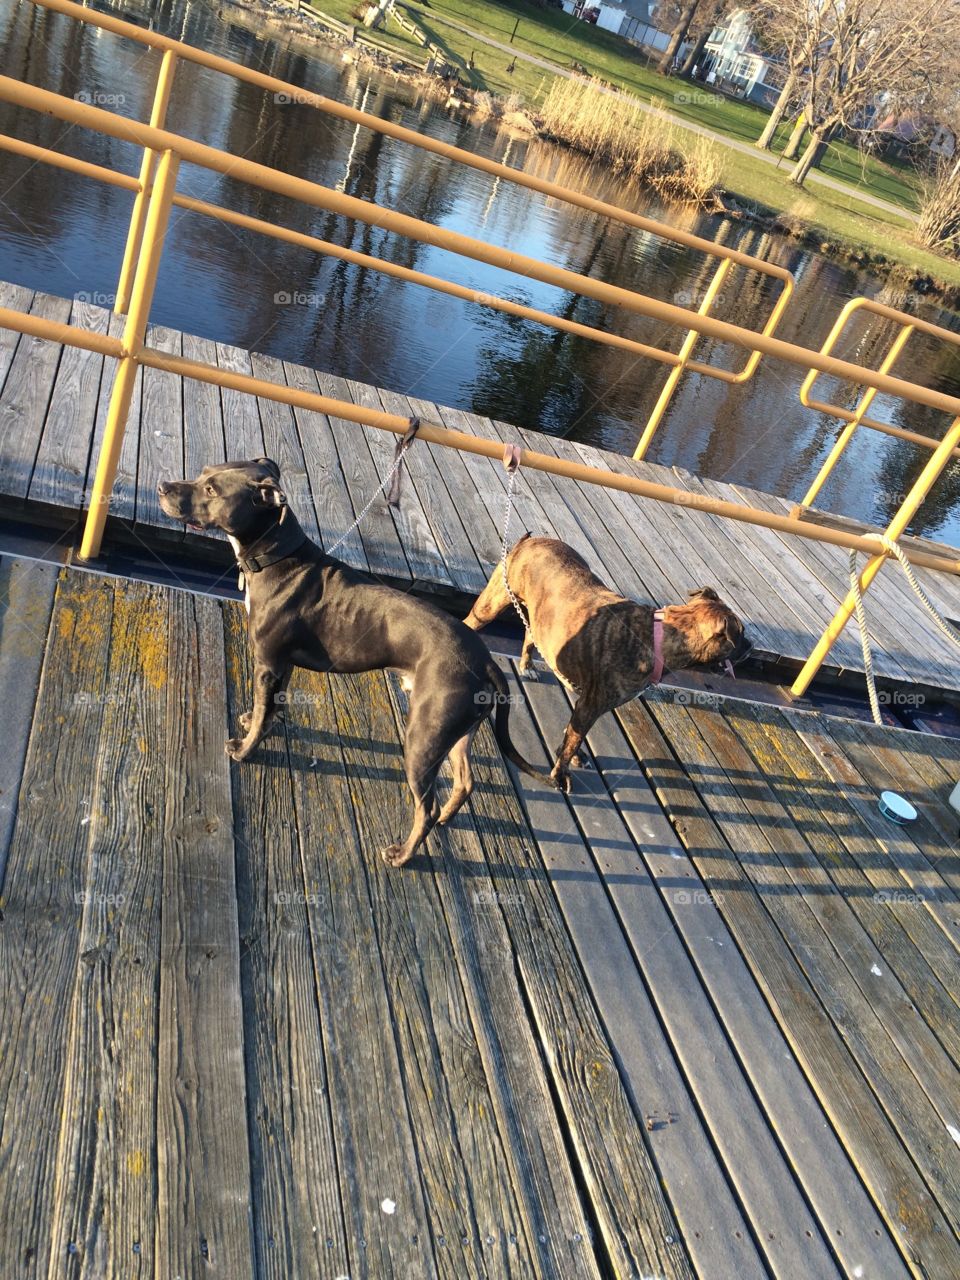 Dogs by water 